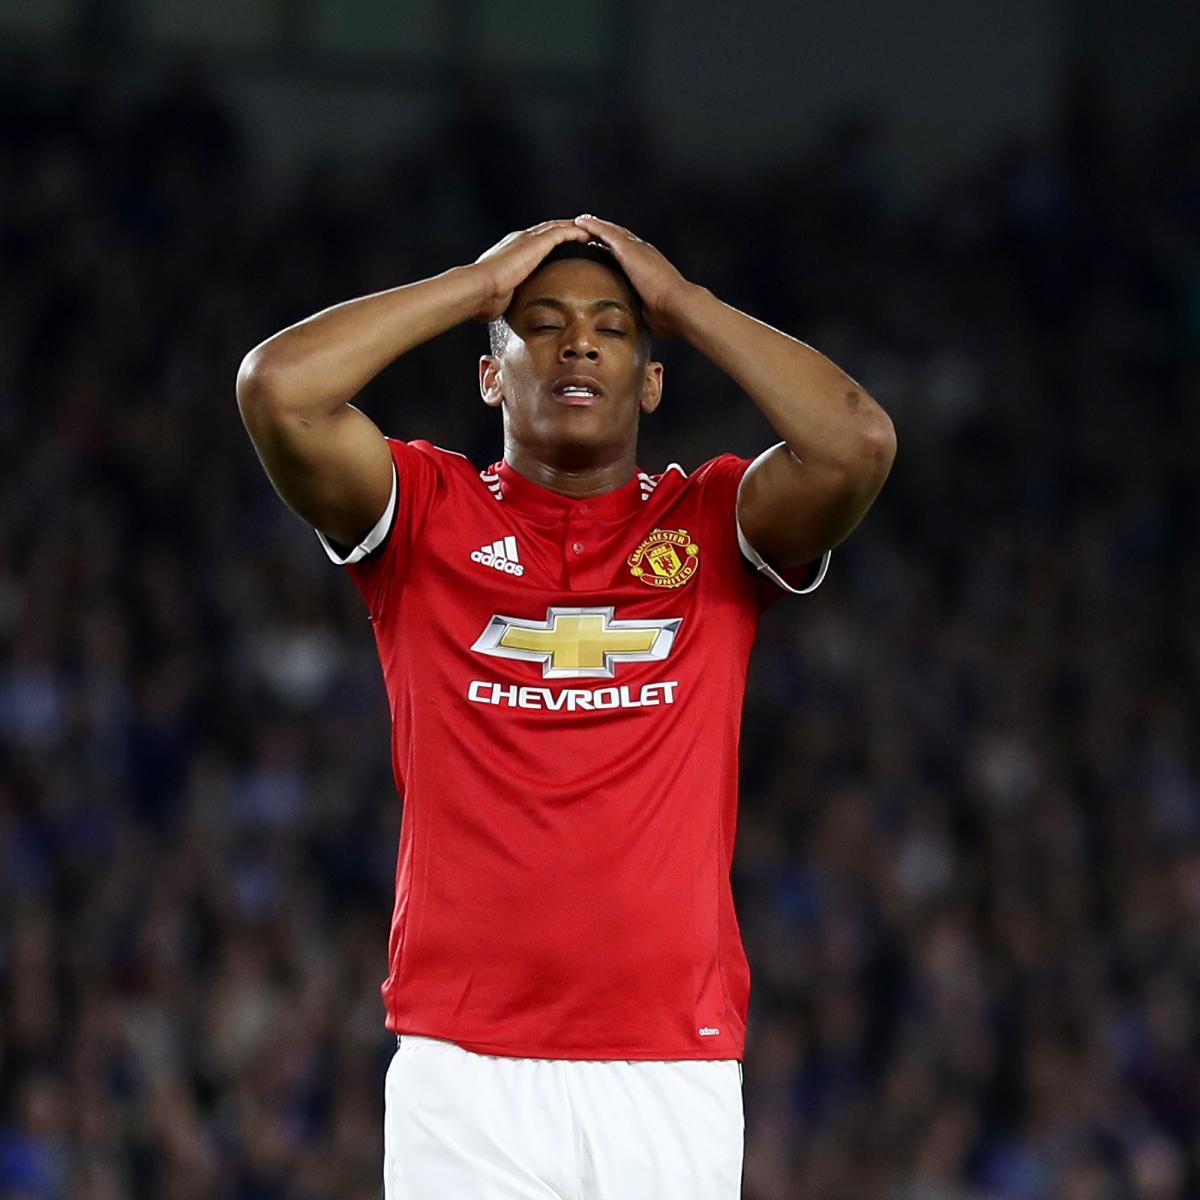 Chelsea Transfer News: Latest Rumours on Anthony Martial, Willian Swap Deal